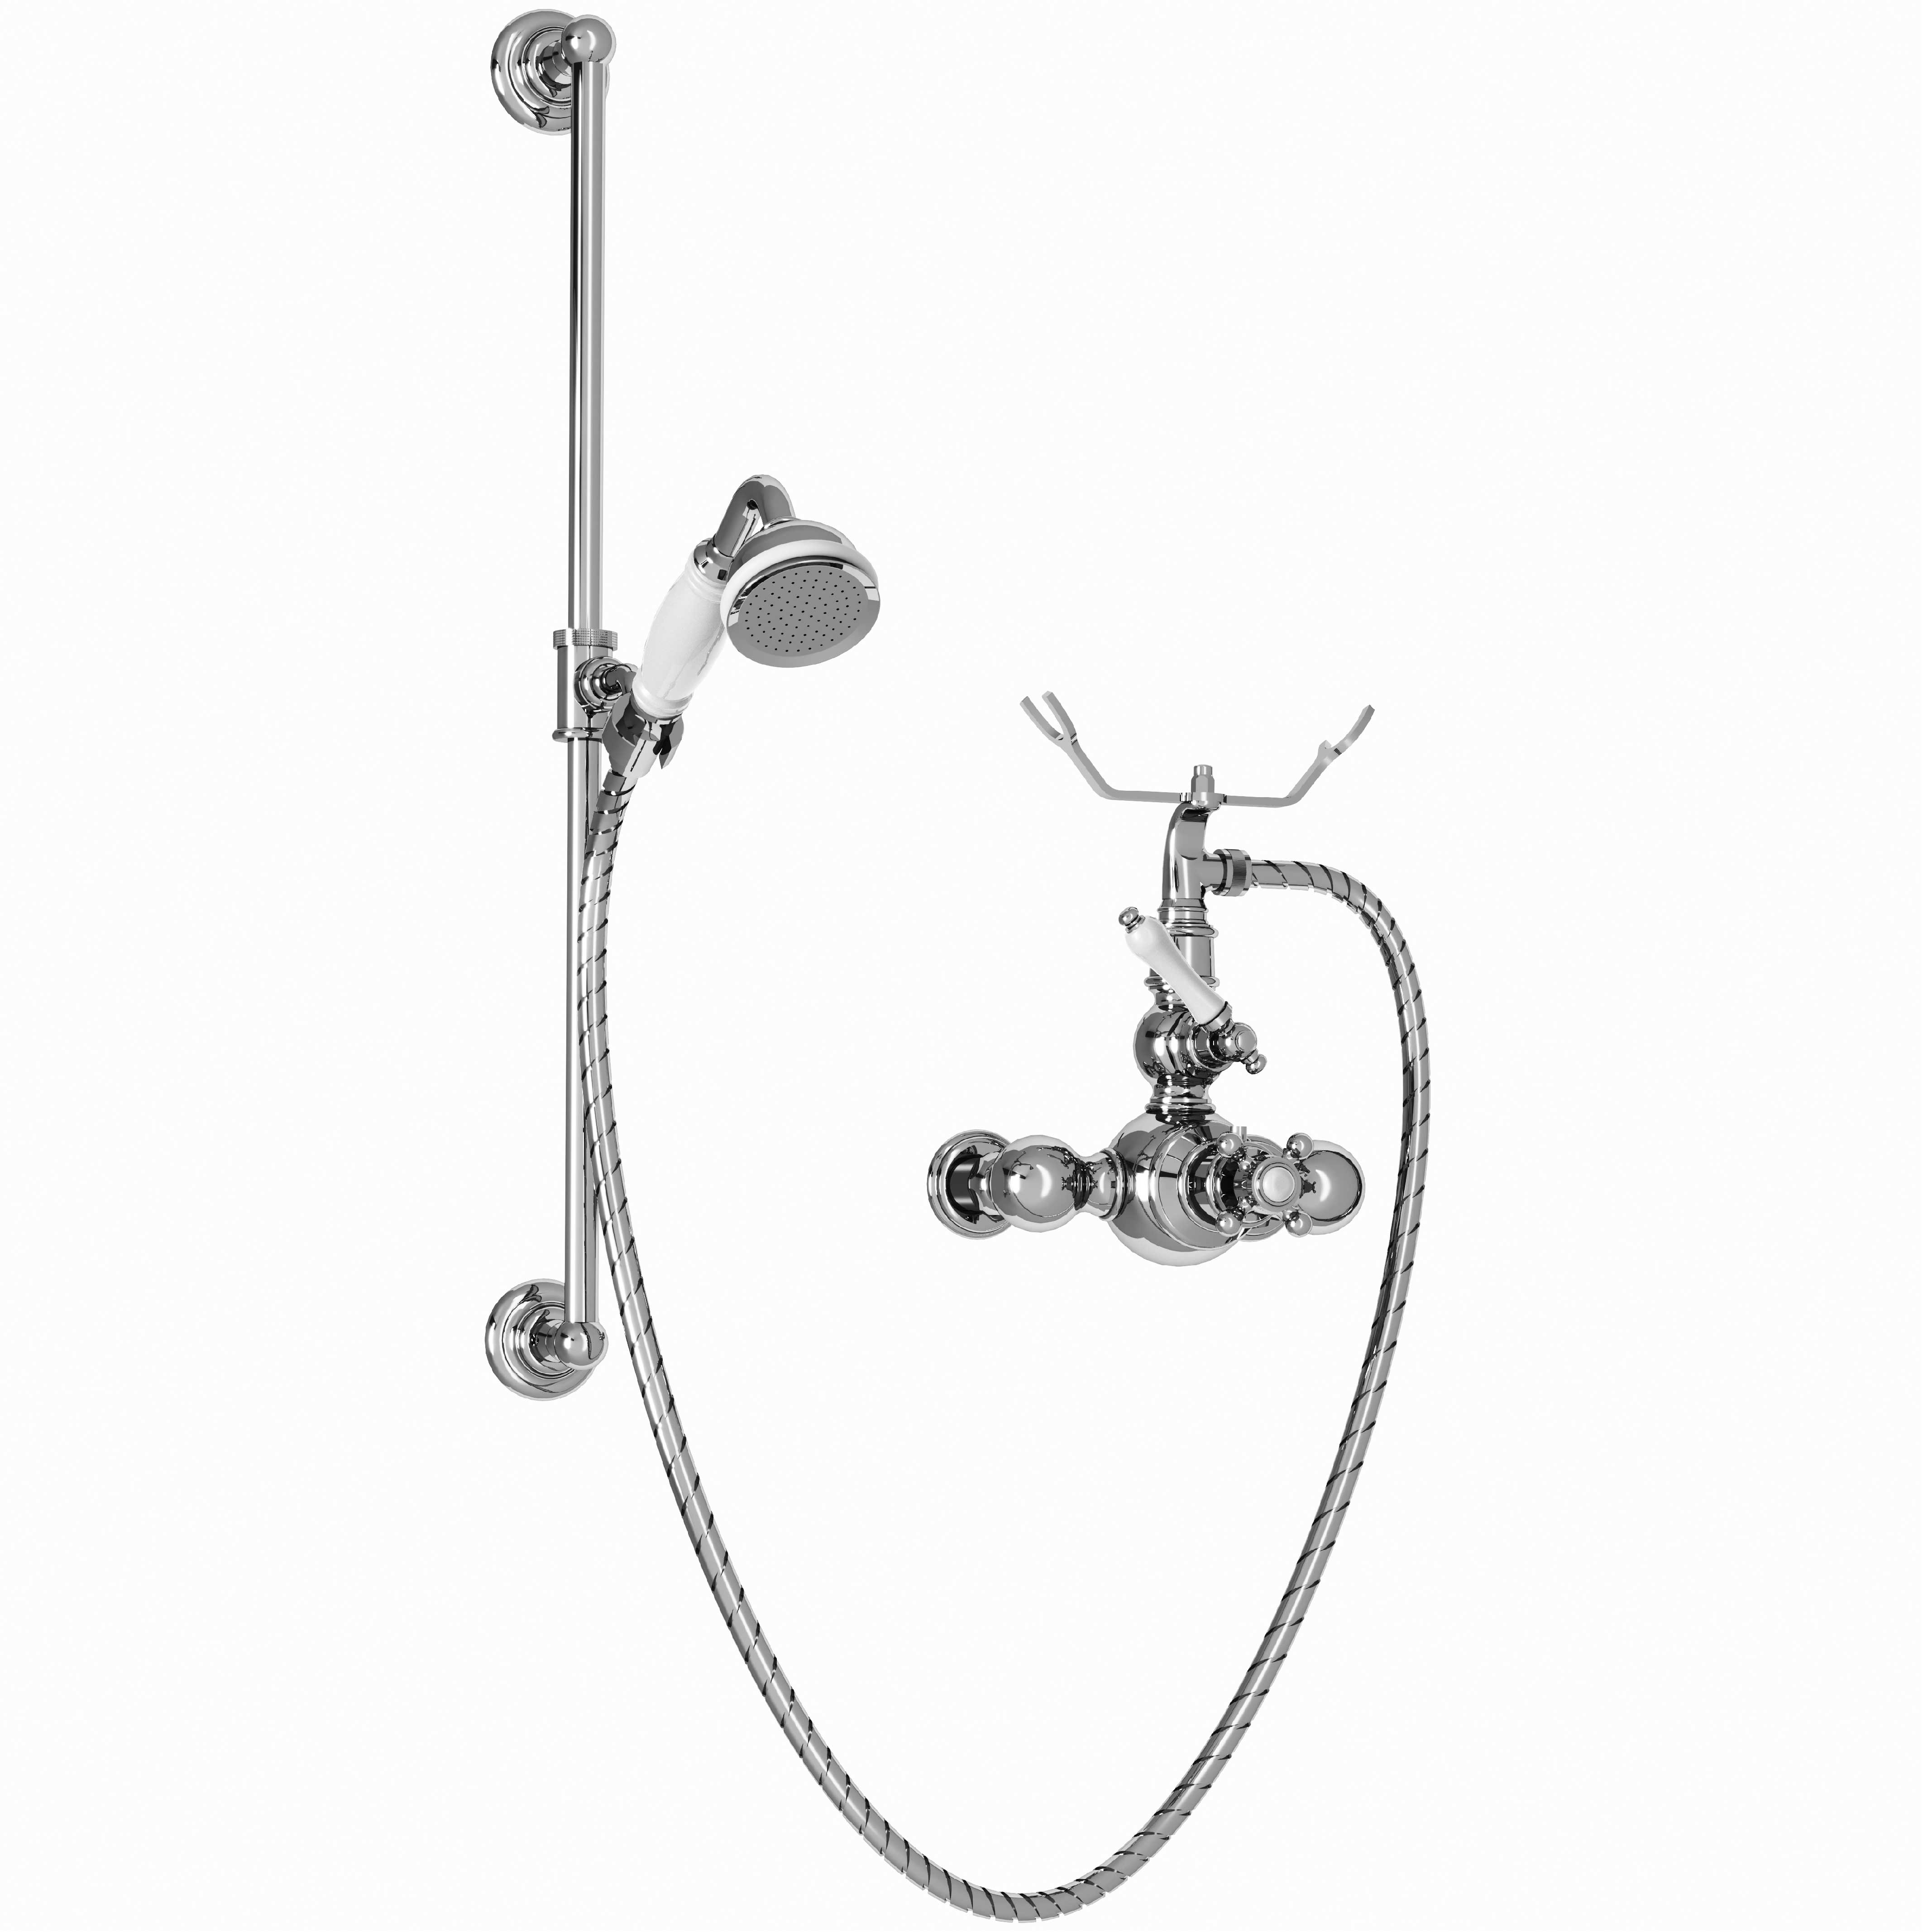 M20-2202T Mitigeur thermo. douche, coulidouche